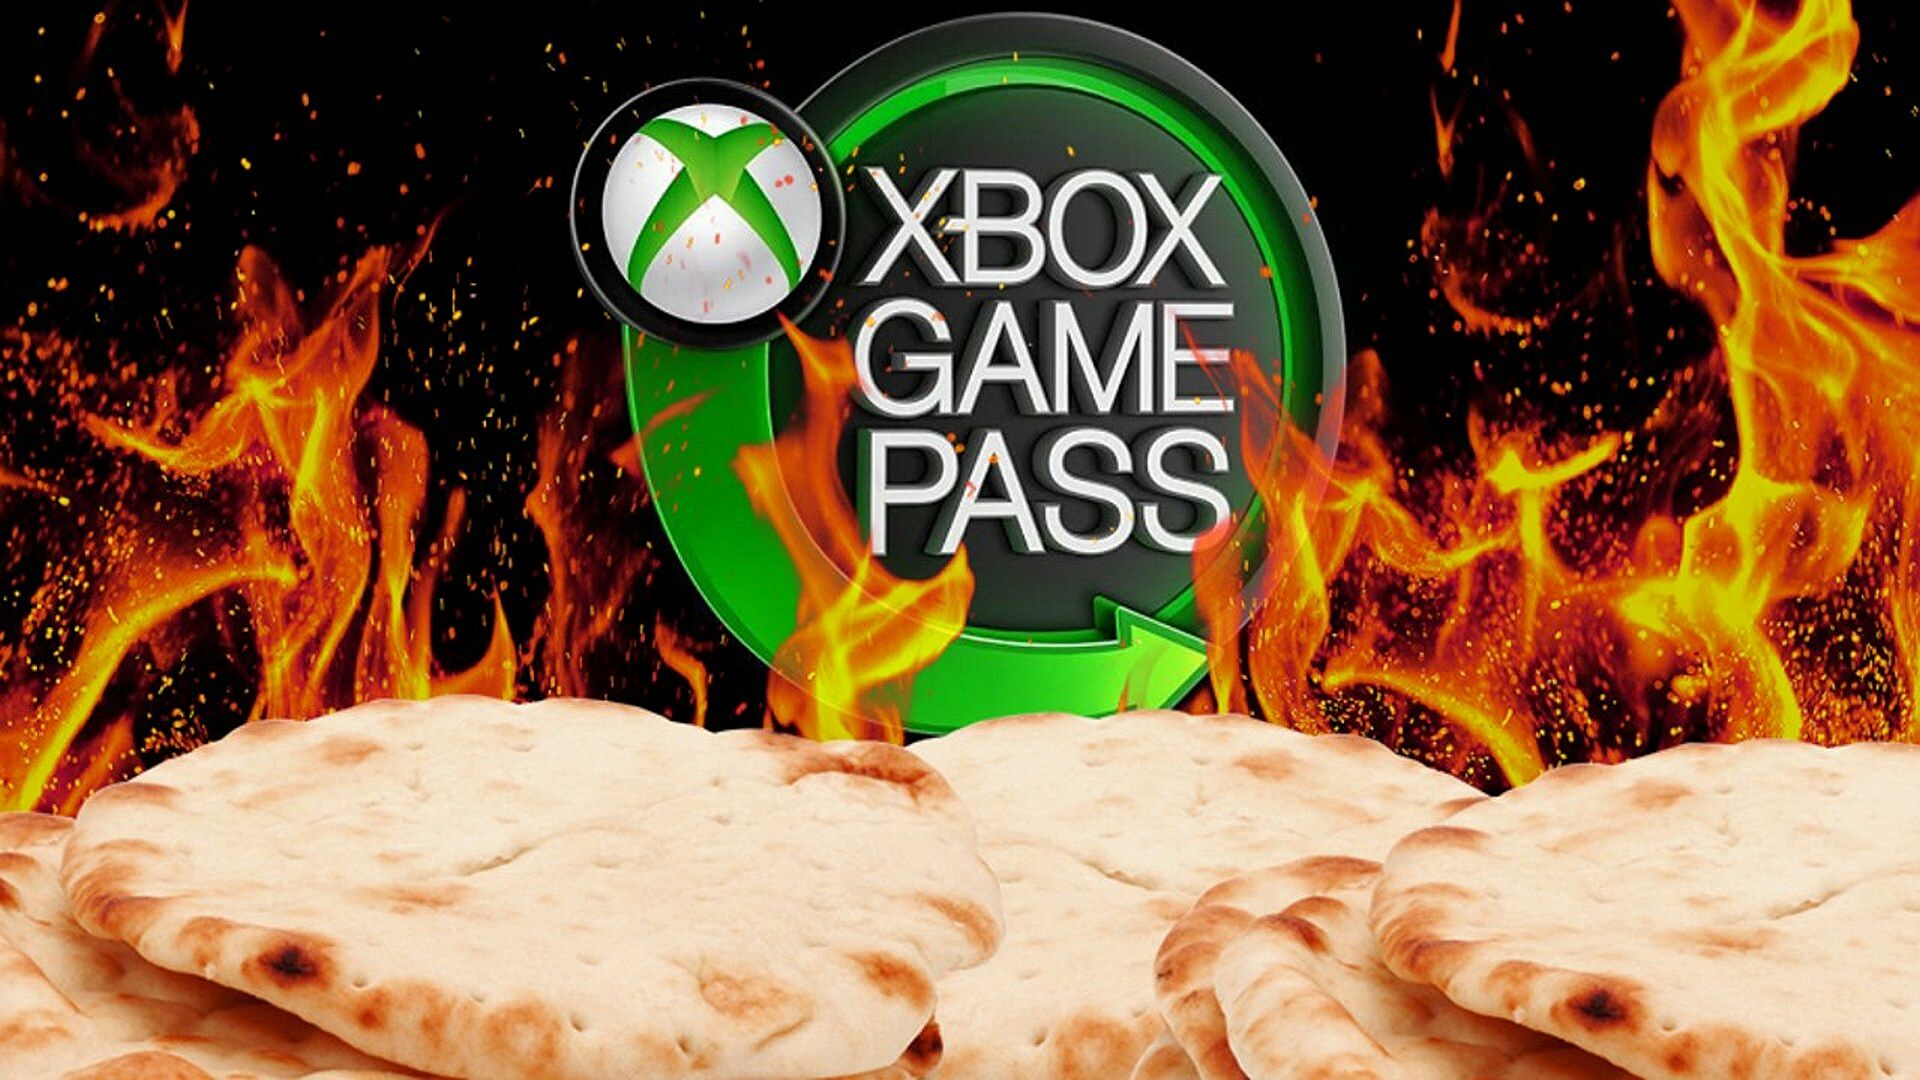 New Xbox Game Pass addition is so moreish I burnt my lunch